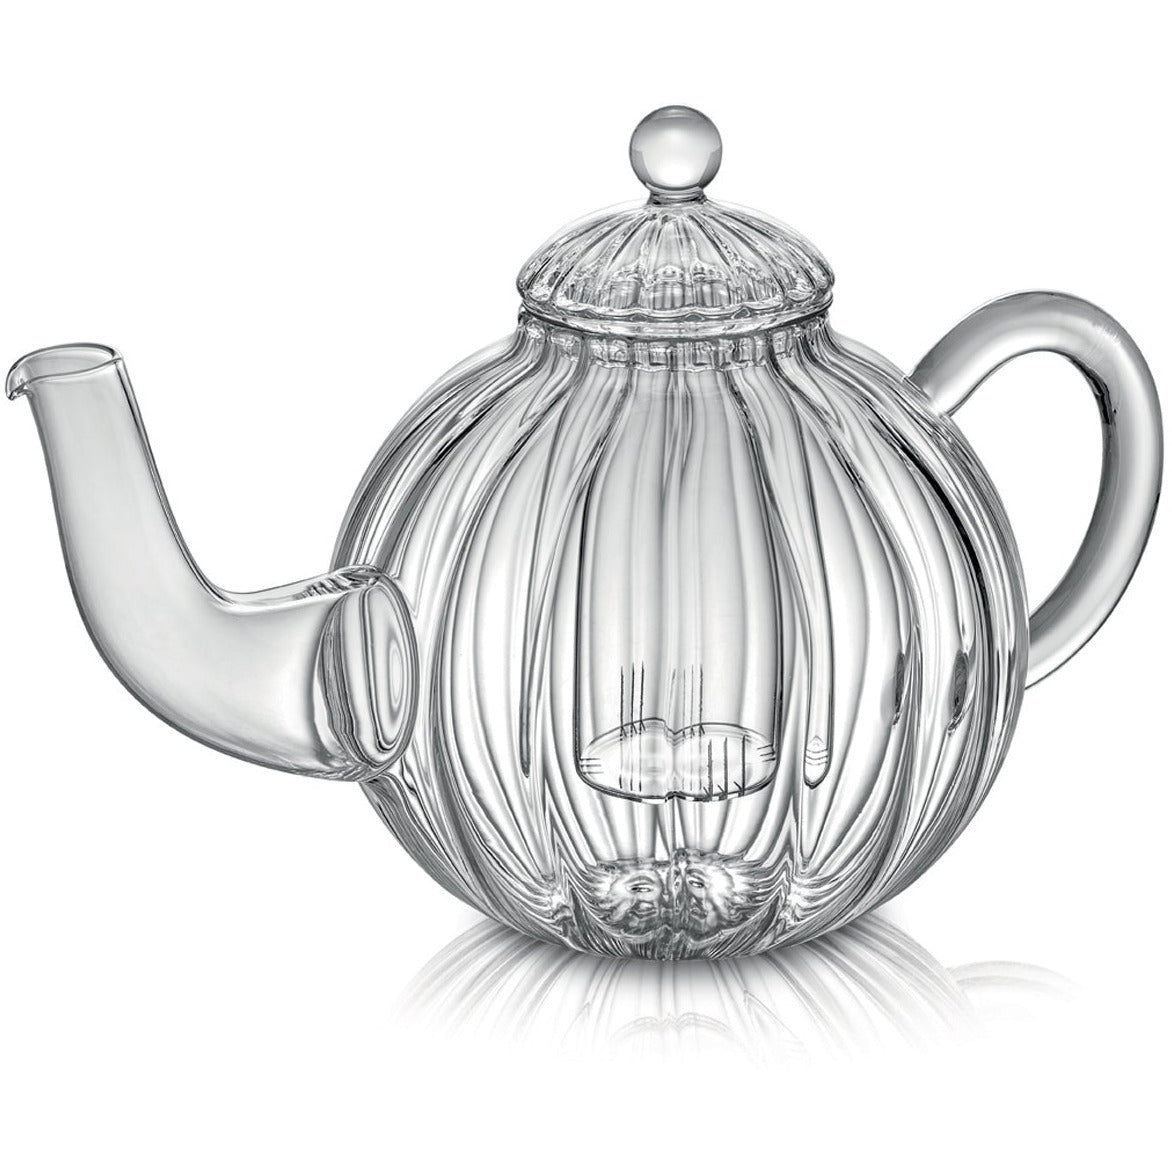 Acopa Lotus 42 oz. Glass Teapot with Stainless Steel Infuser